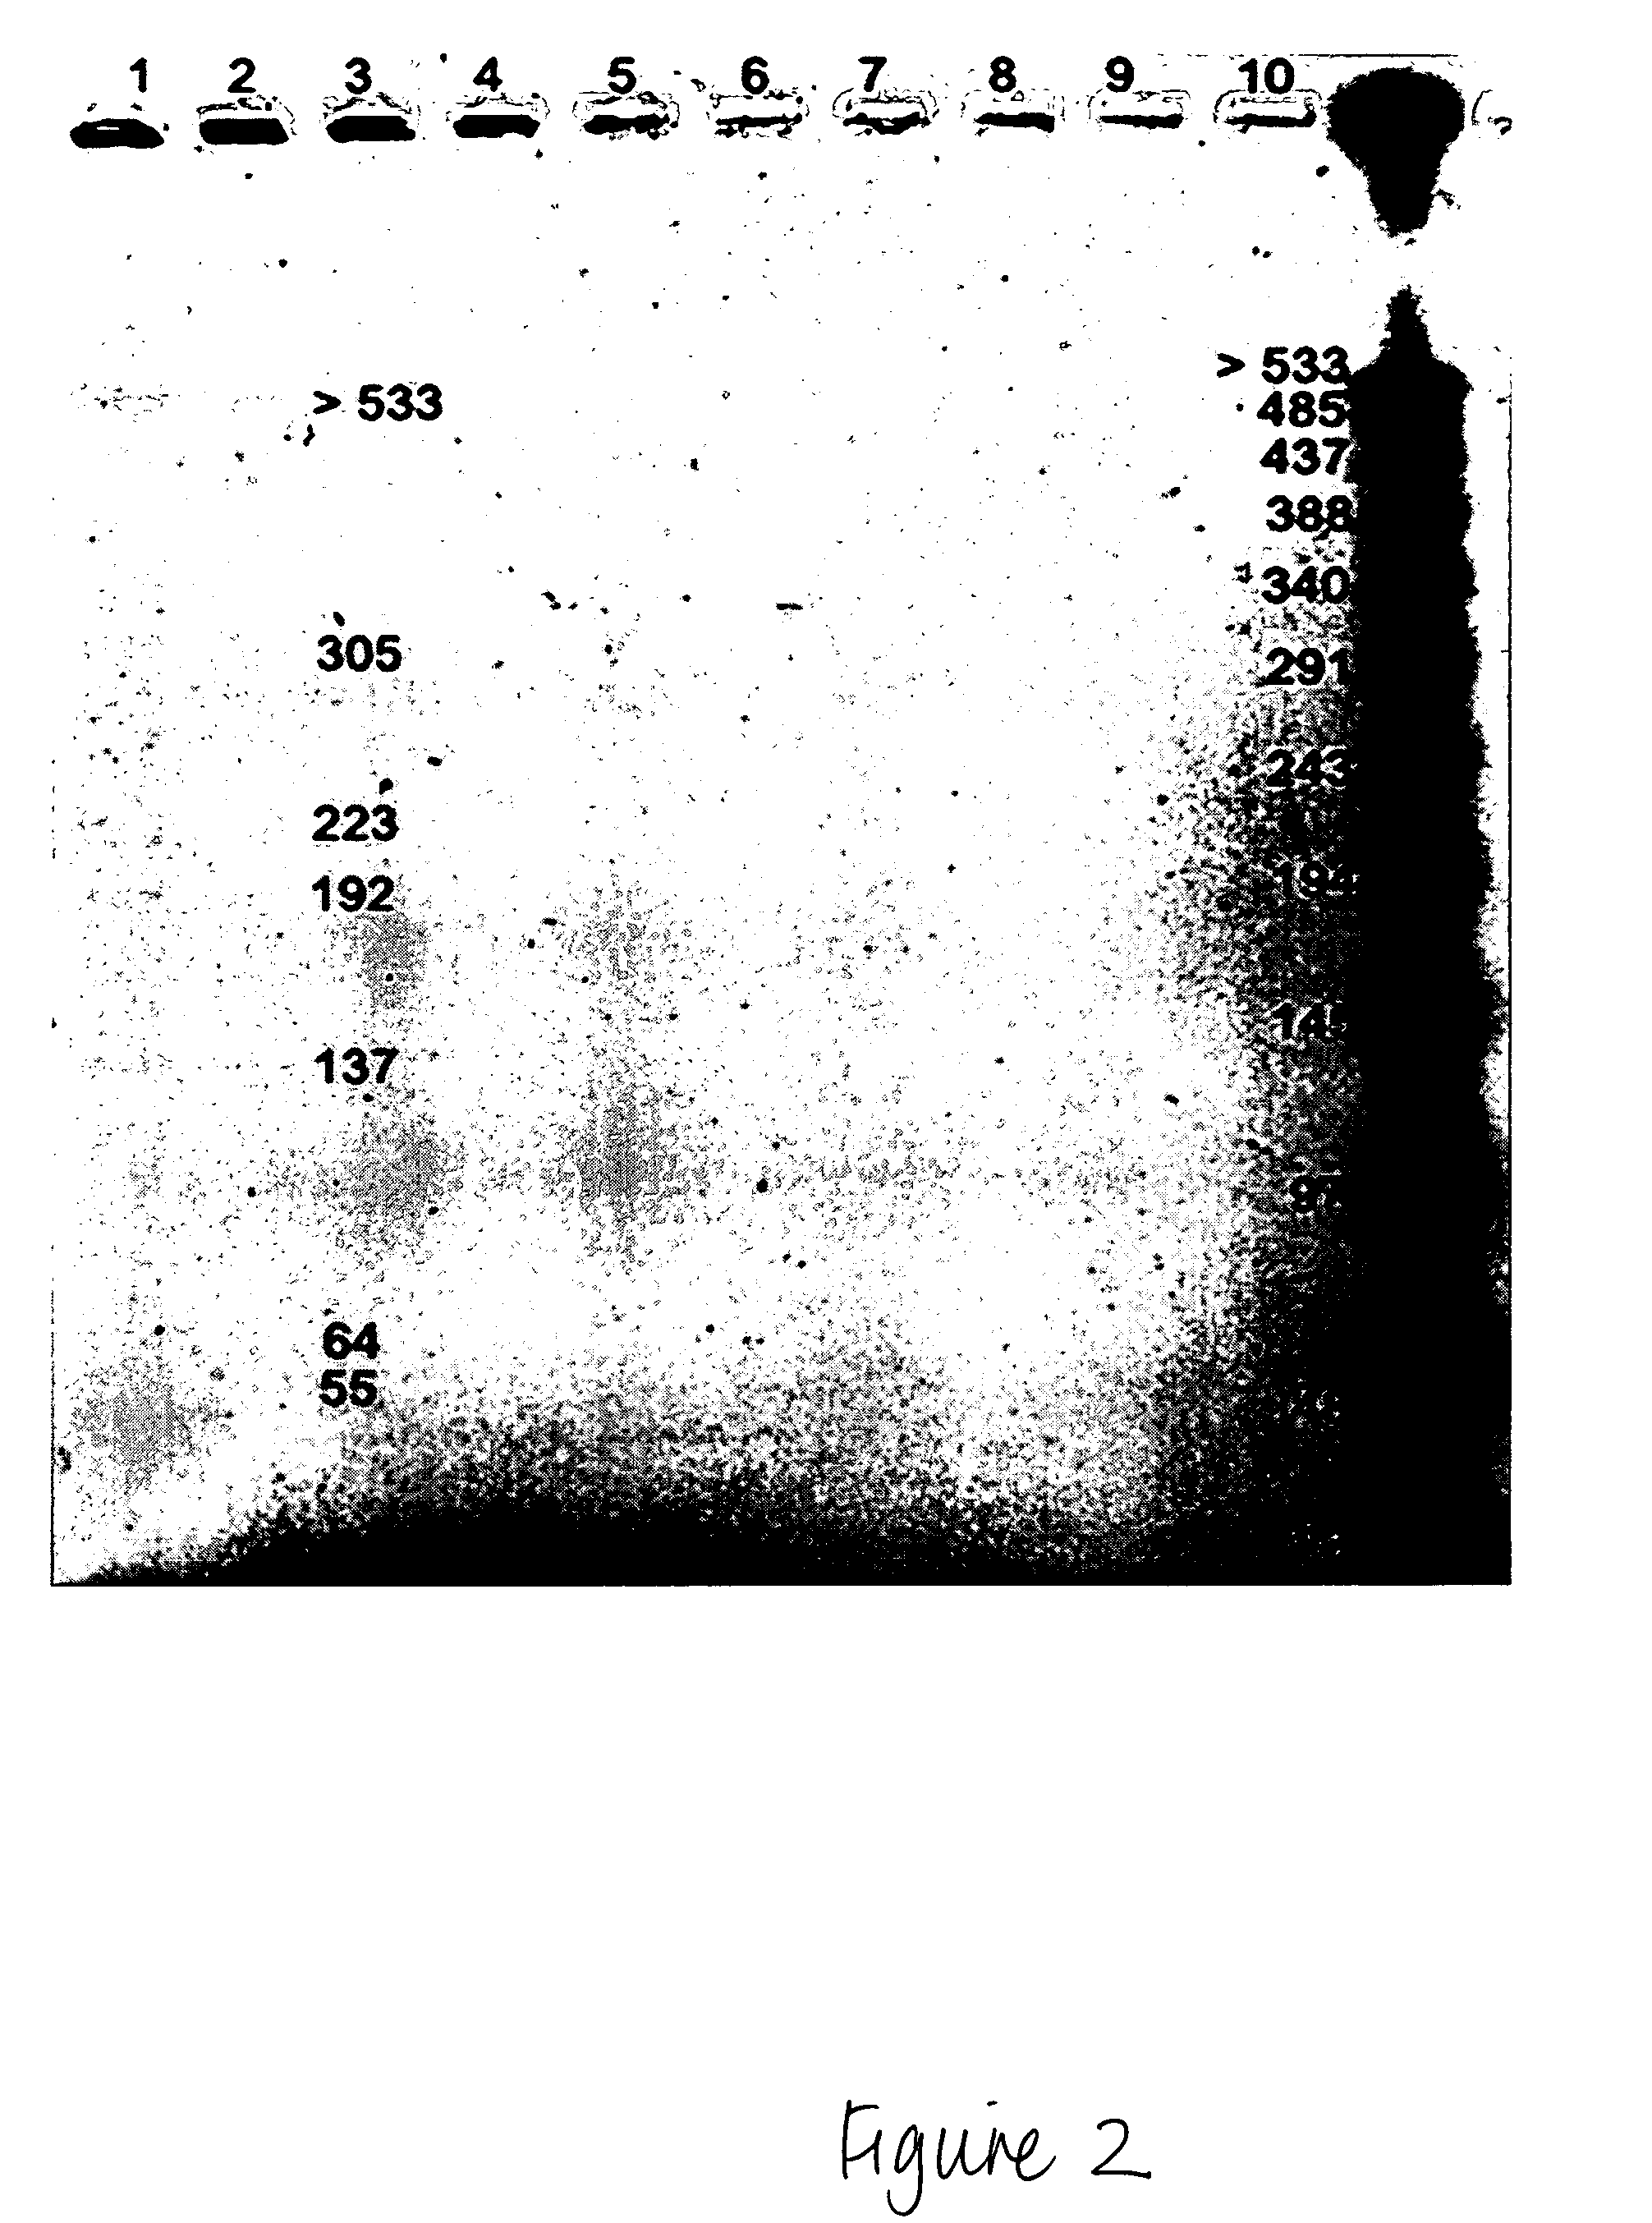 Methods for isolation of nucleic acids from prokaryotic spores